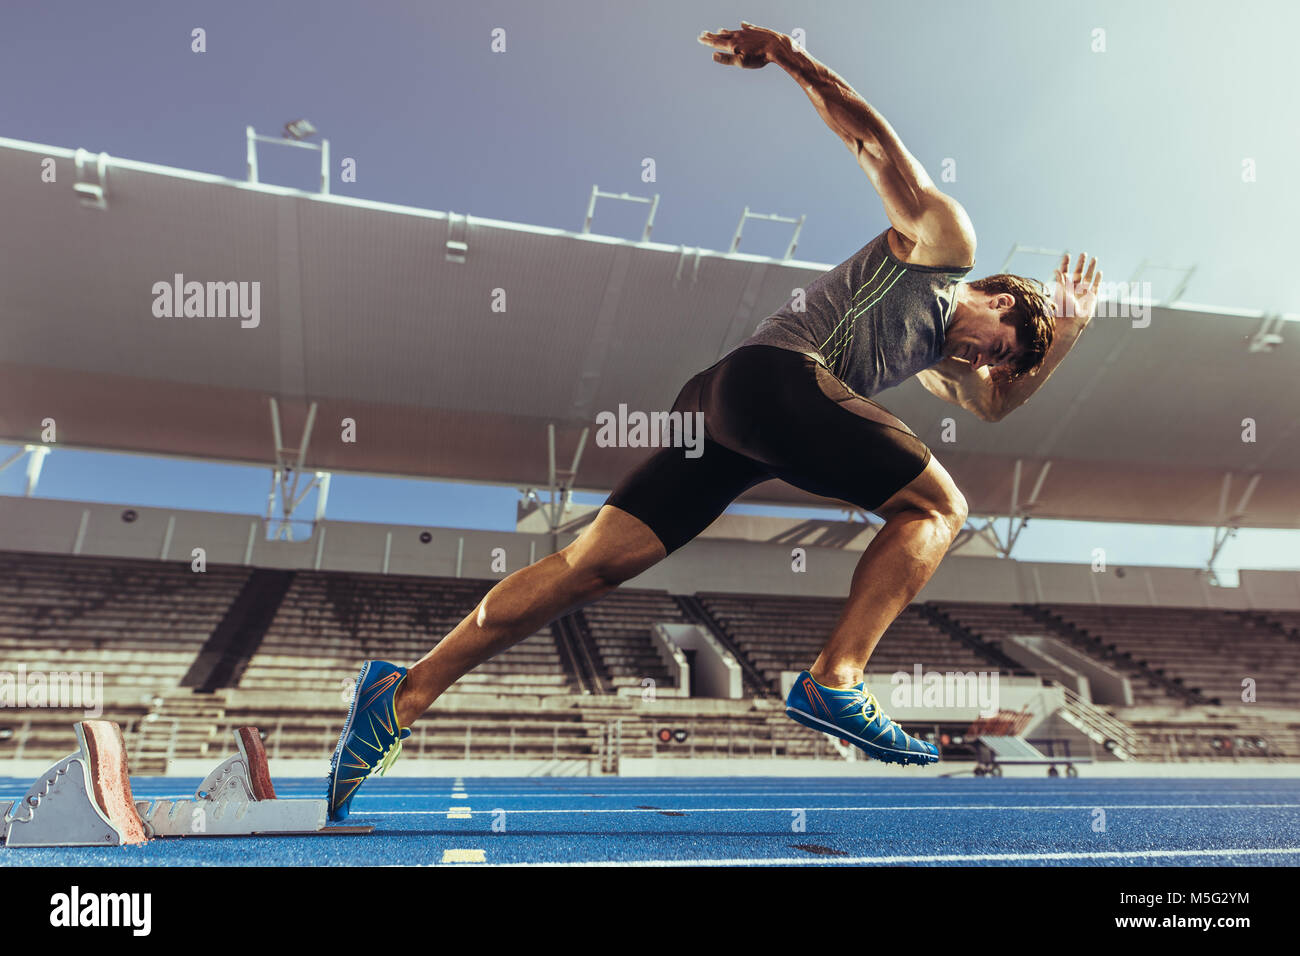 Athlete starting his sprint on an all-weather running track. Runner using starting block to start his run on running track in a stadium. Stock Photo